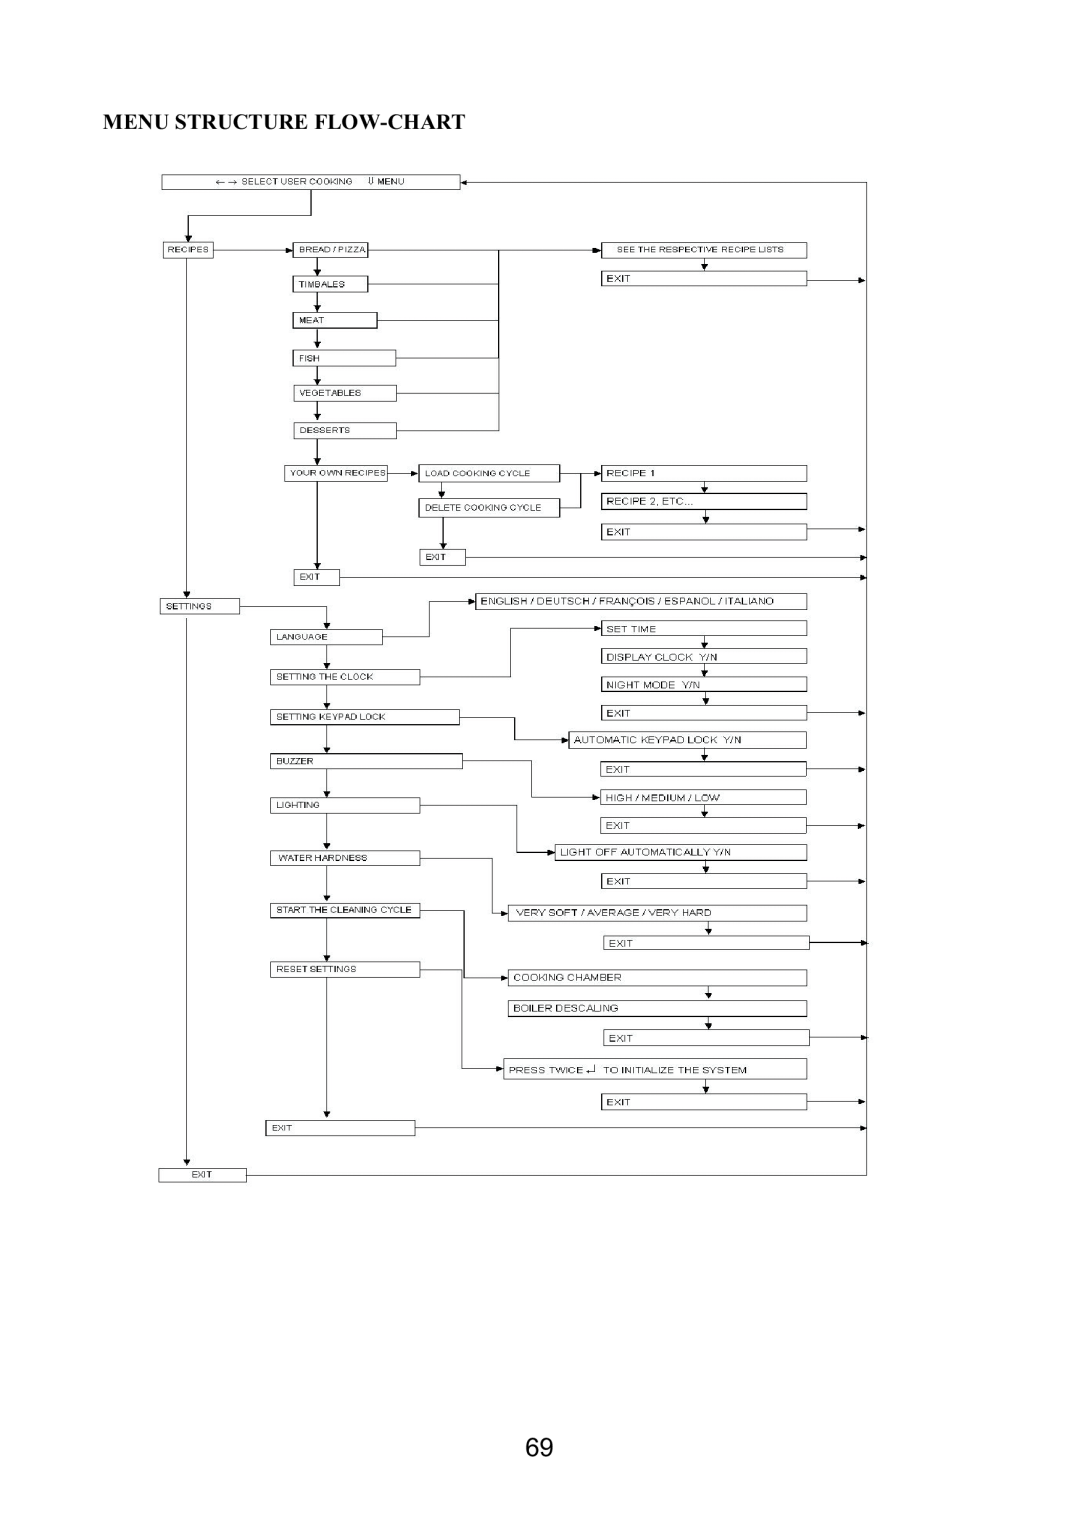 Foster S4000 user manual Menu Structure Flow-Chart 